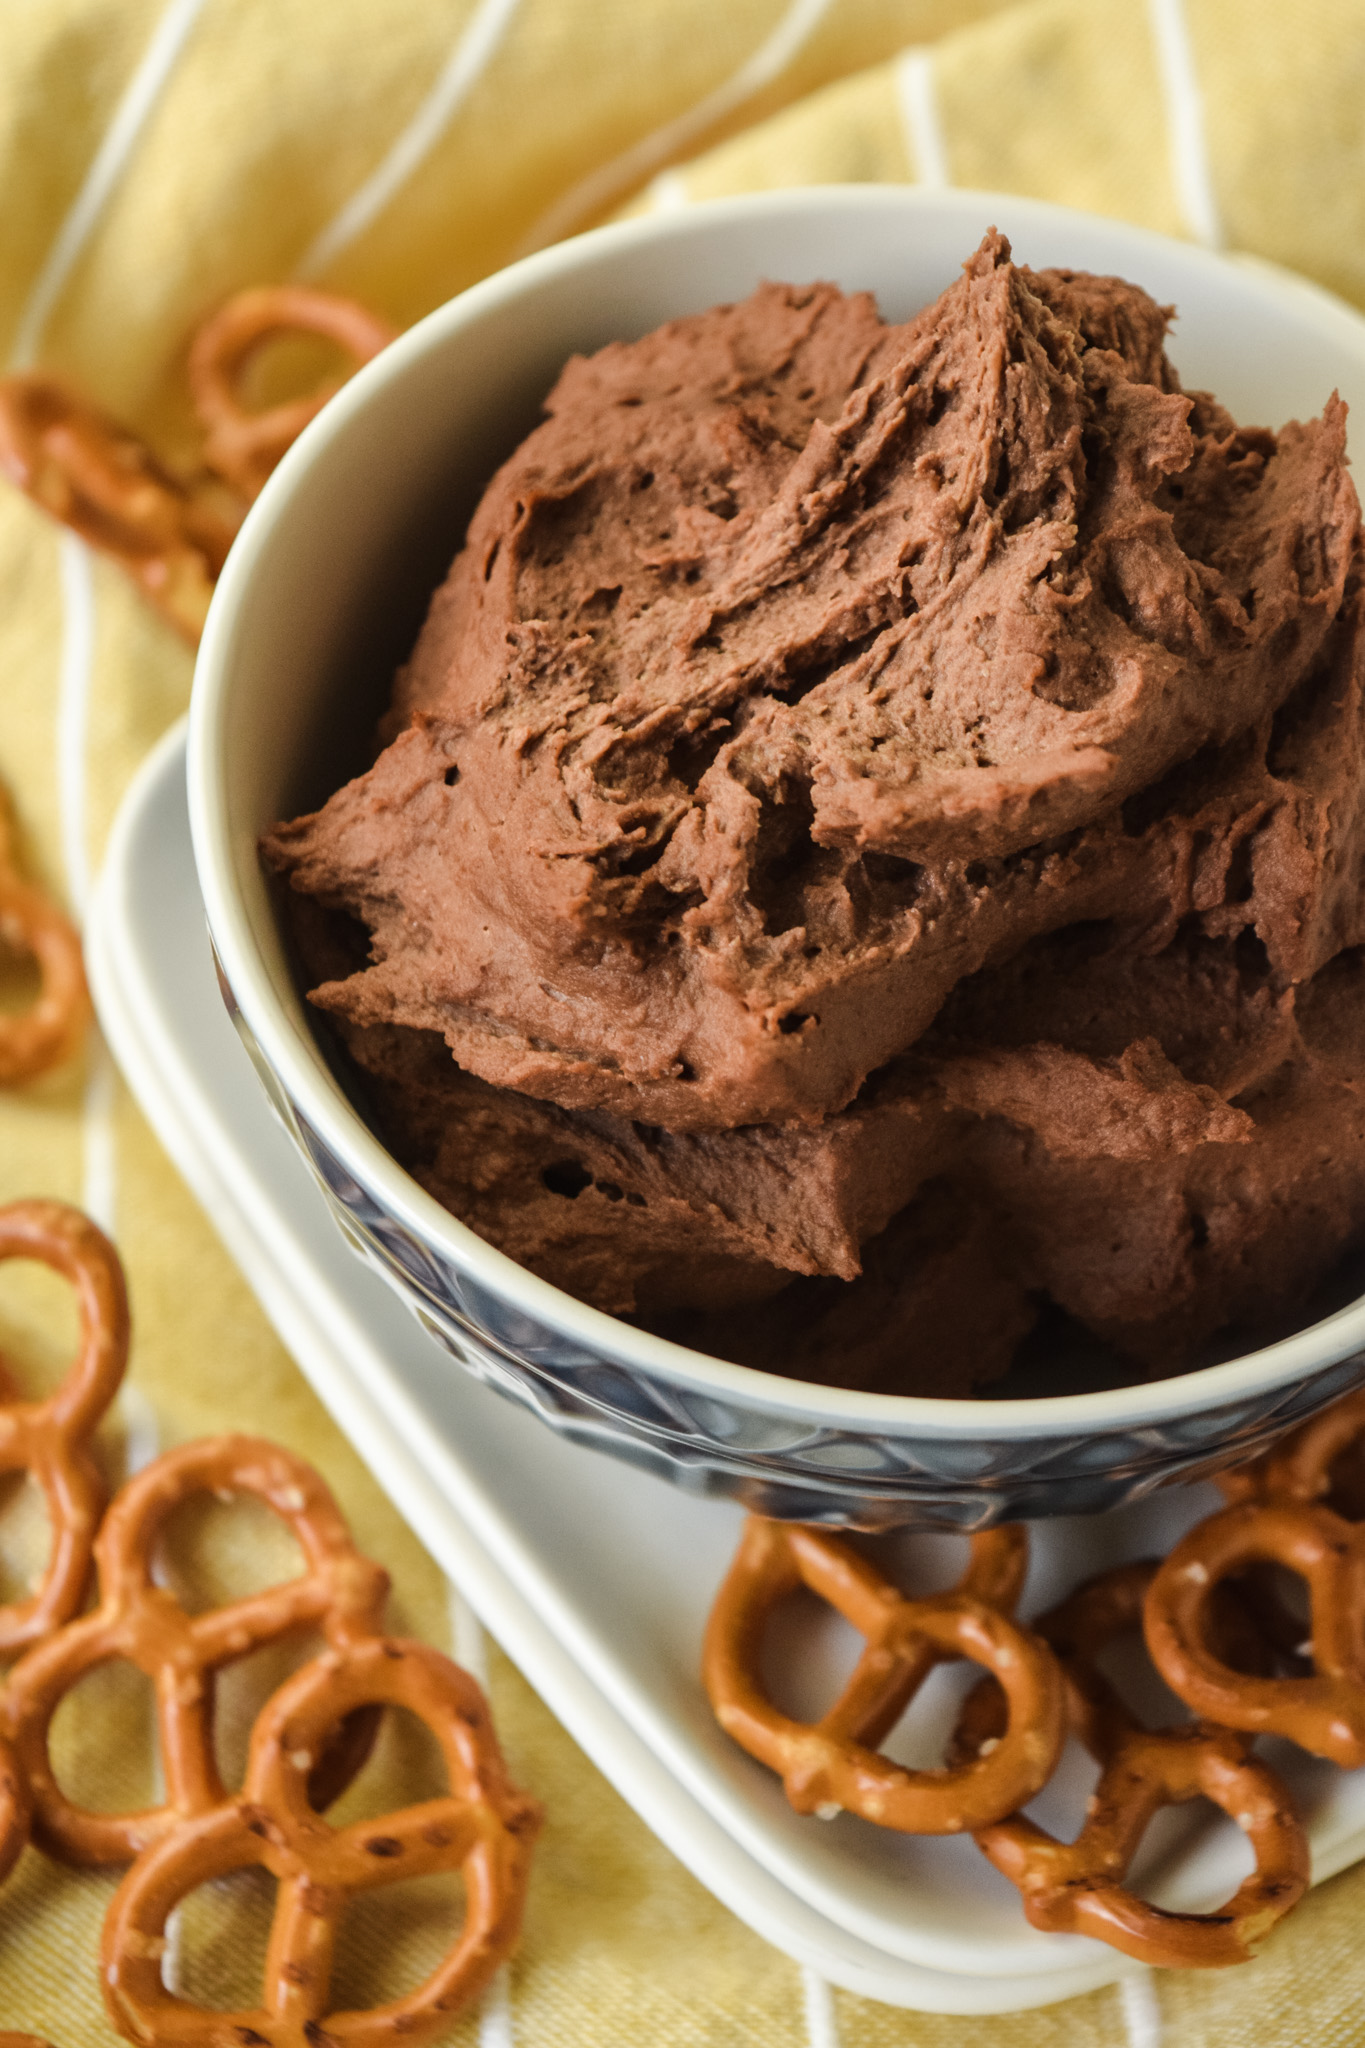 Dessert hummus with chocolate and peanut butter